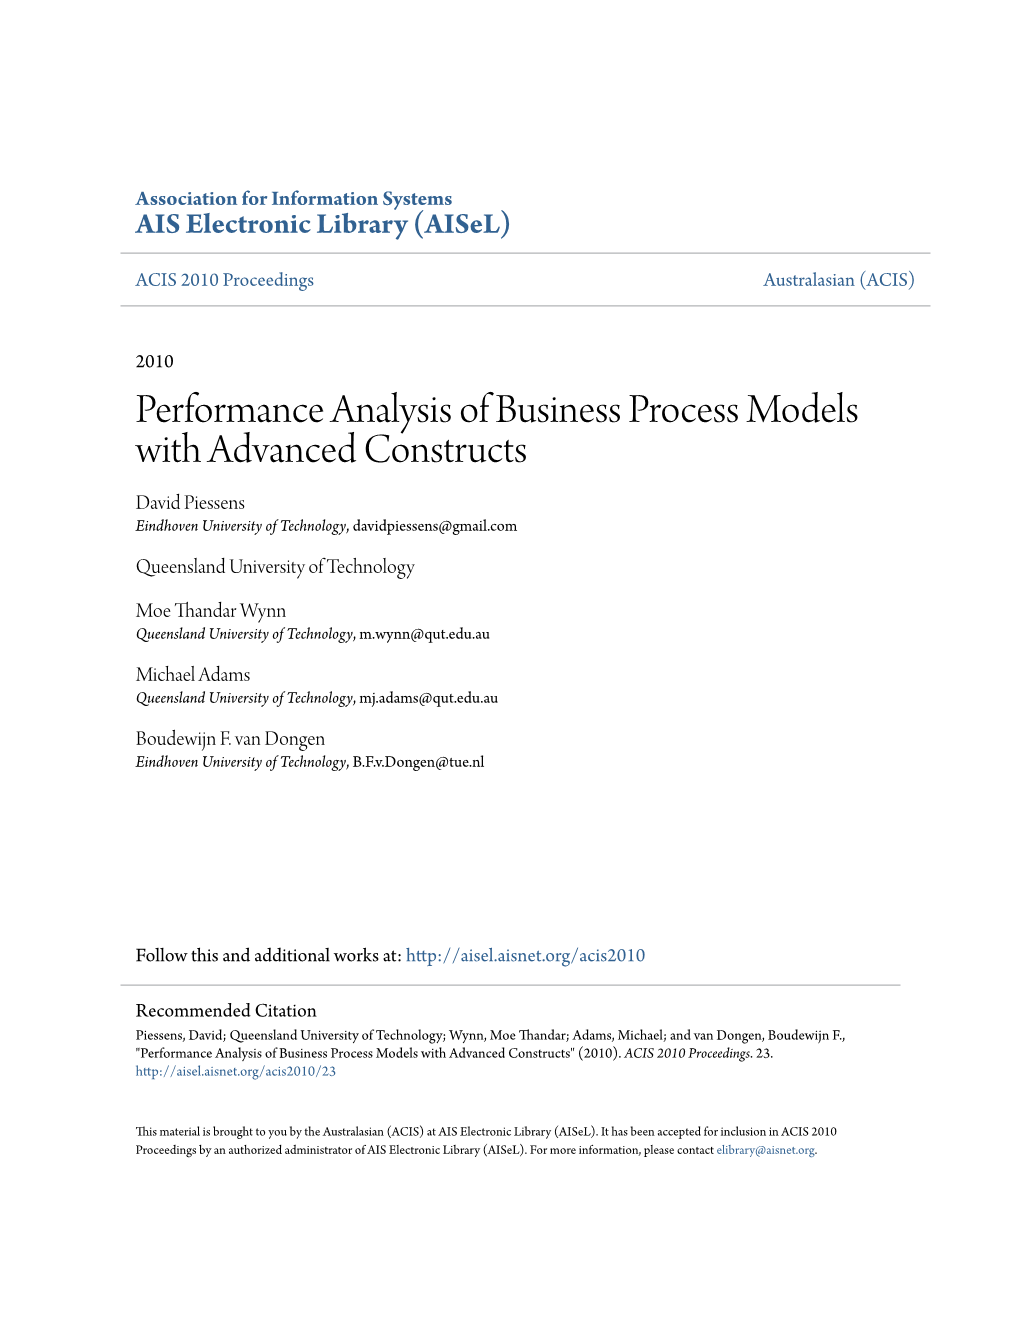 Performance Analysis of Business Process Models with Advanced Constructs David Piessens Eindhoven University of Technology, Davidpiessens@Gmail.Com